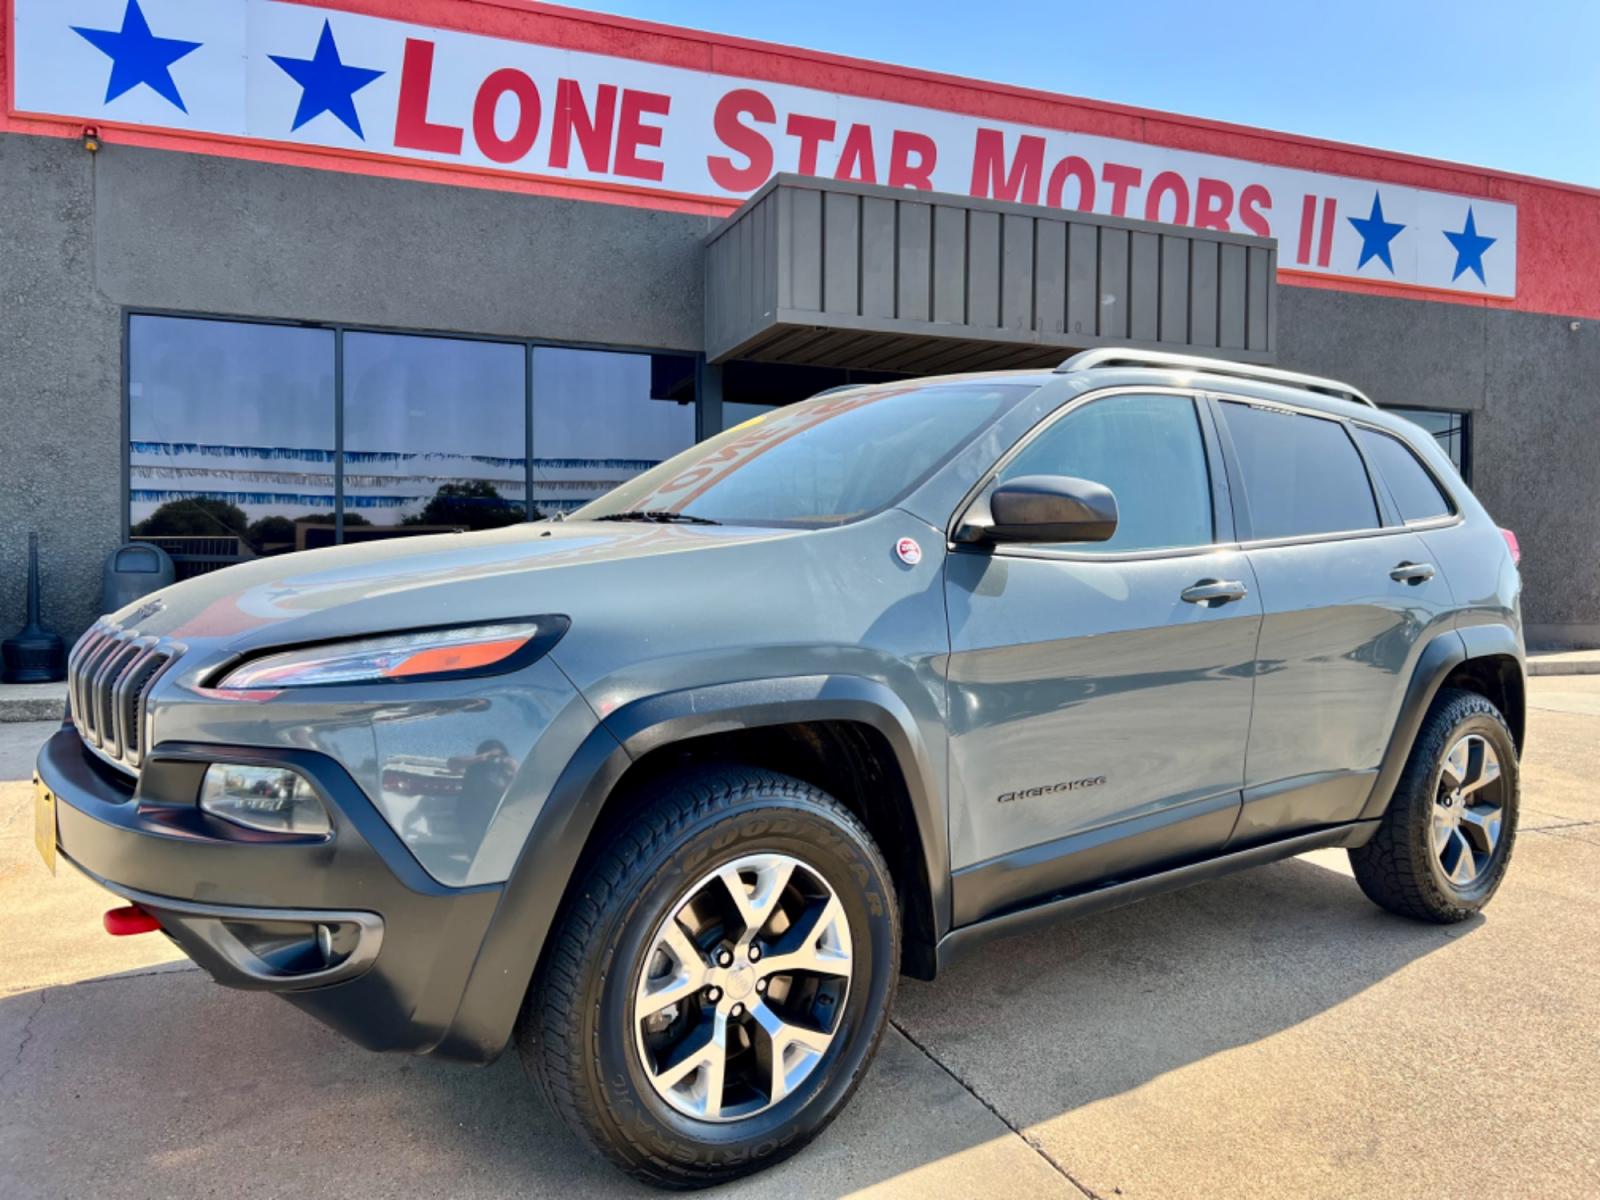 2014 GRAY JEEP CHEROKEE (1C4PJMBS1EW) , located at 5900 E. Lancaster Ave., Fort Worth, TX, 76112, (817) 457-5456, 0.000000, 0.000000 - This is a 2014 JEEP CHEROKEE 4 DOOR SUV that is in excellent condition. There are no dents or scratches. The interior is clean with no rips or tears or stains. All power windows, door locks and seats. Ice cold AC for those hot Texas summer days. It is equipped with a CD player, AM/FM radio, AUX port - Photo #1